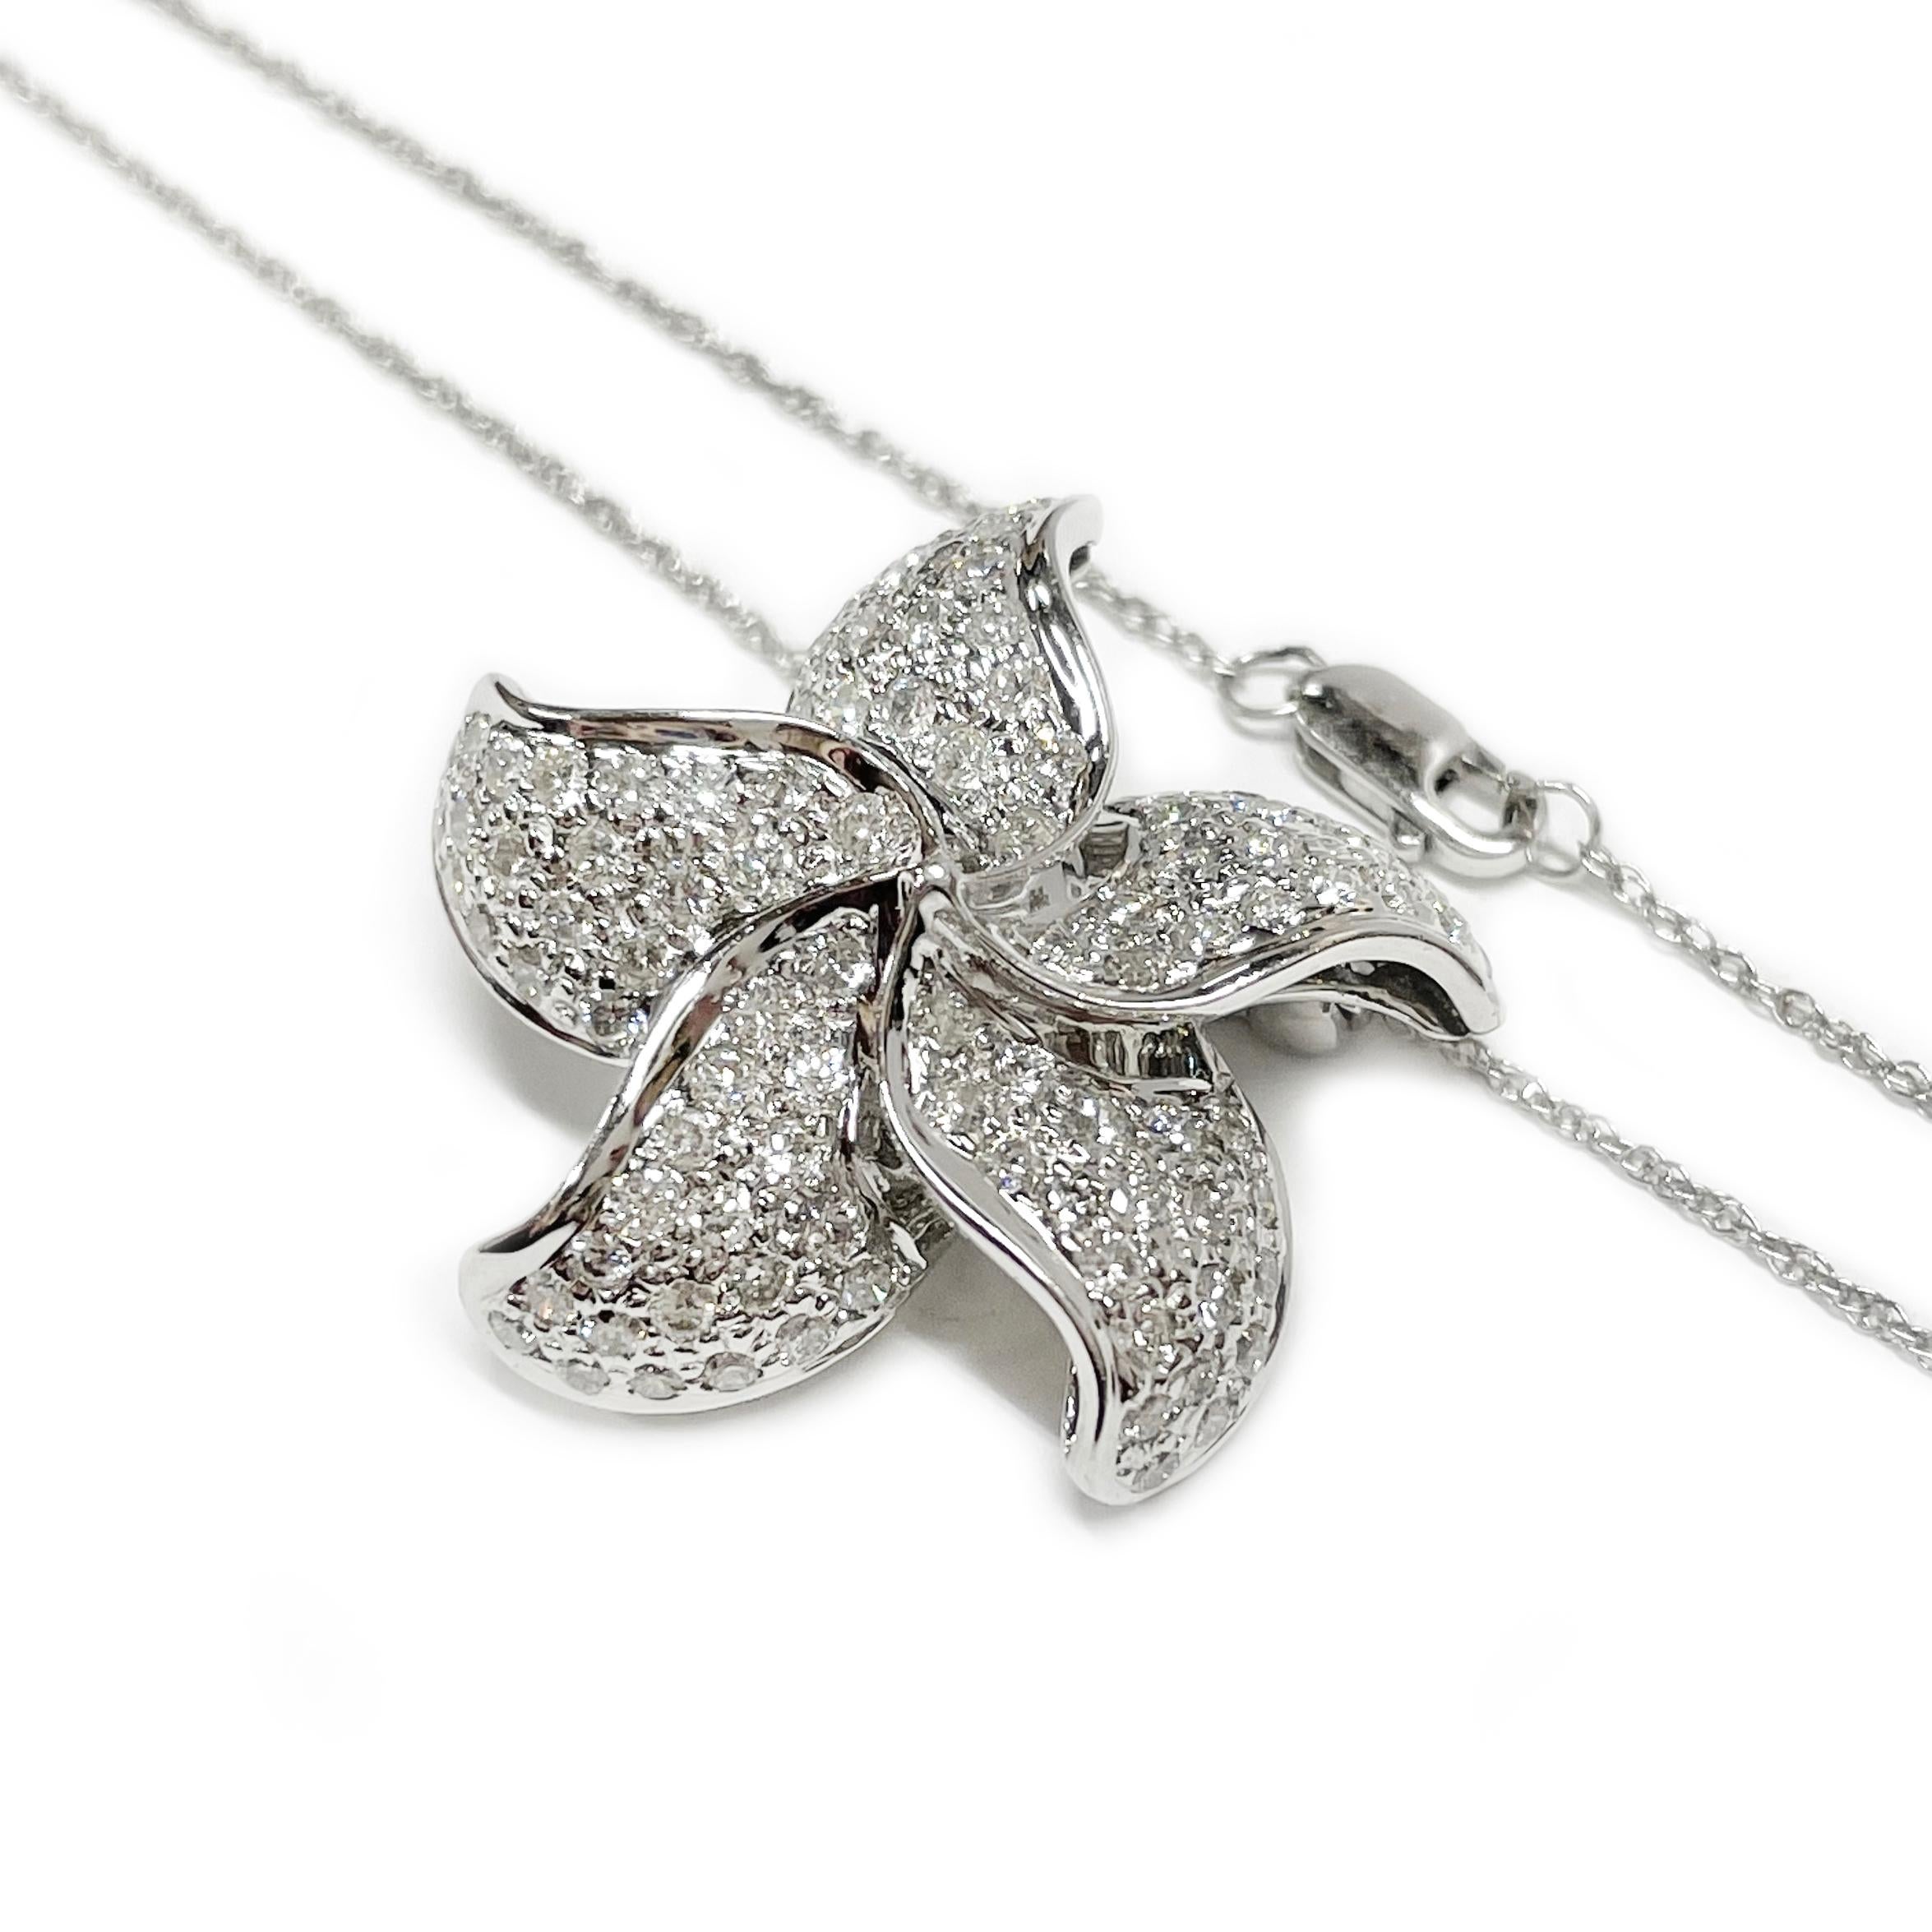 Contemporary White Gold Diamond Flower Pendant/Brooch Necklace